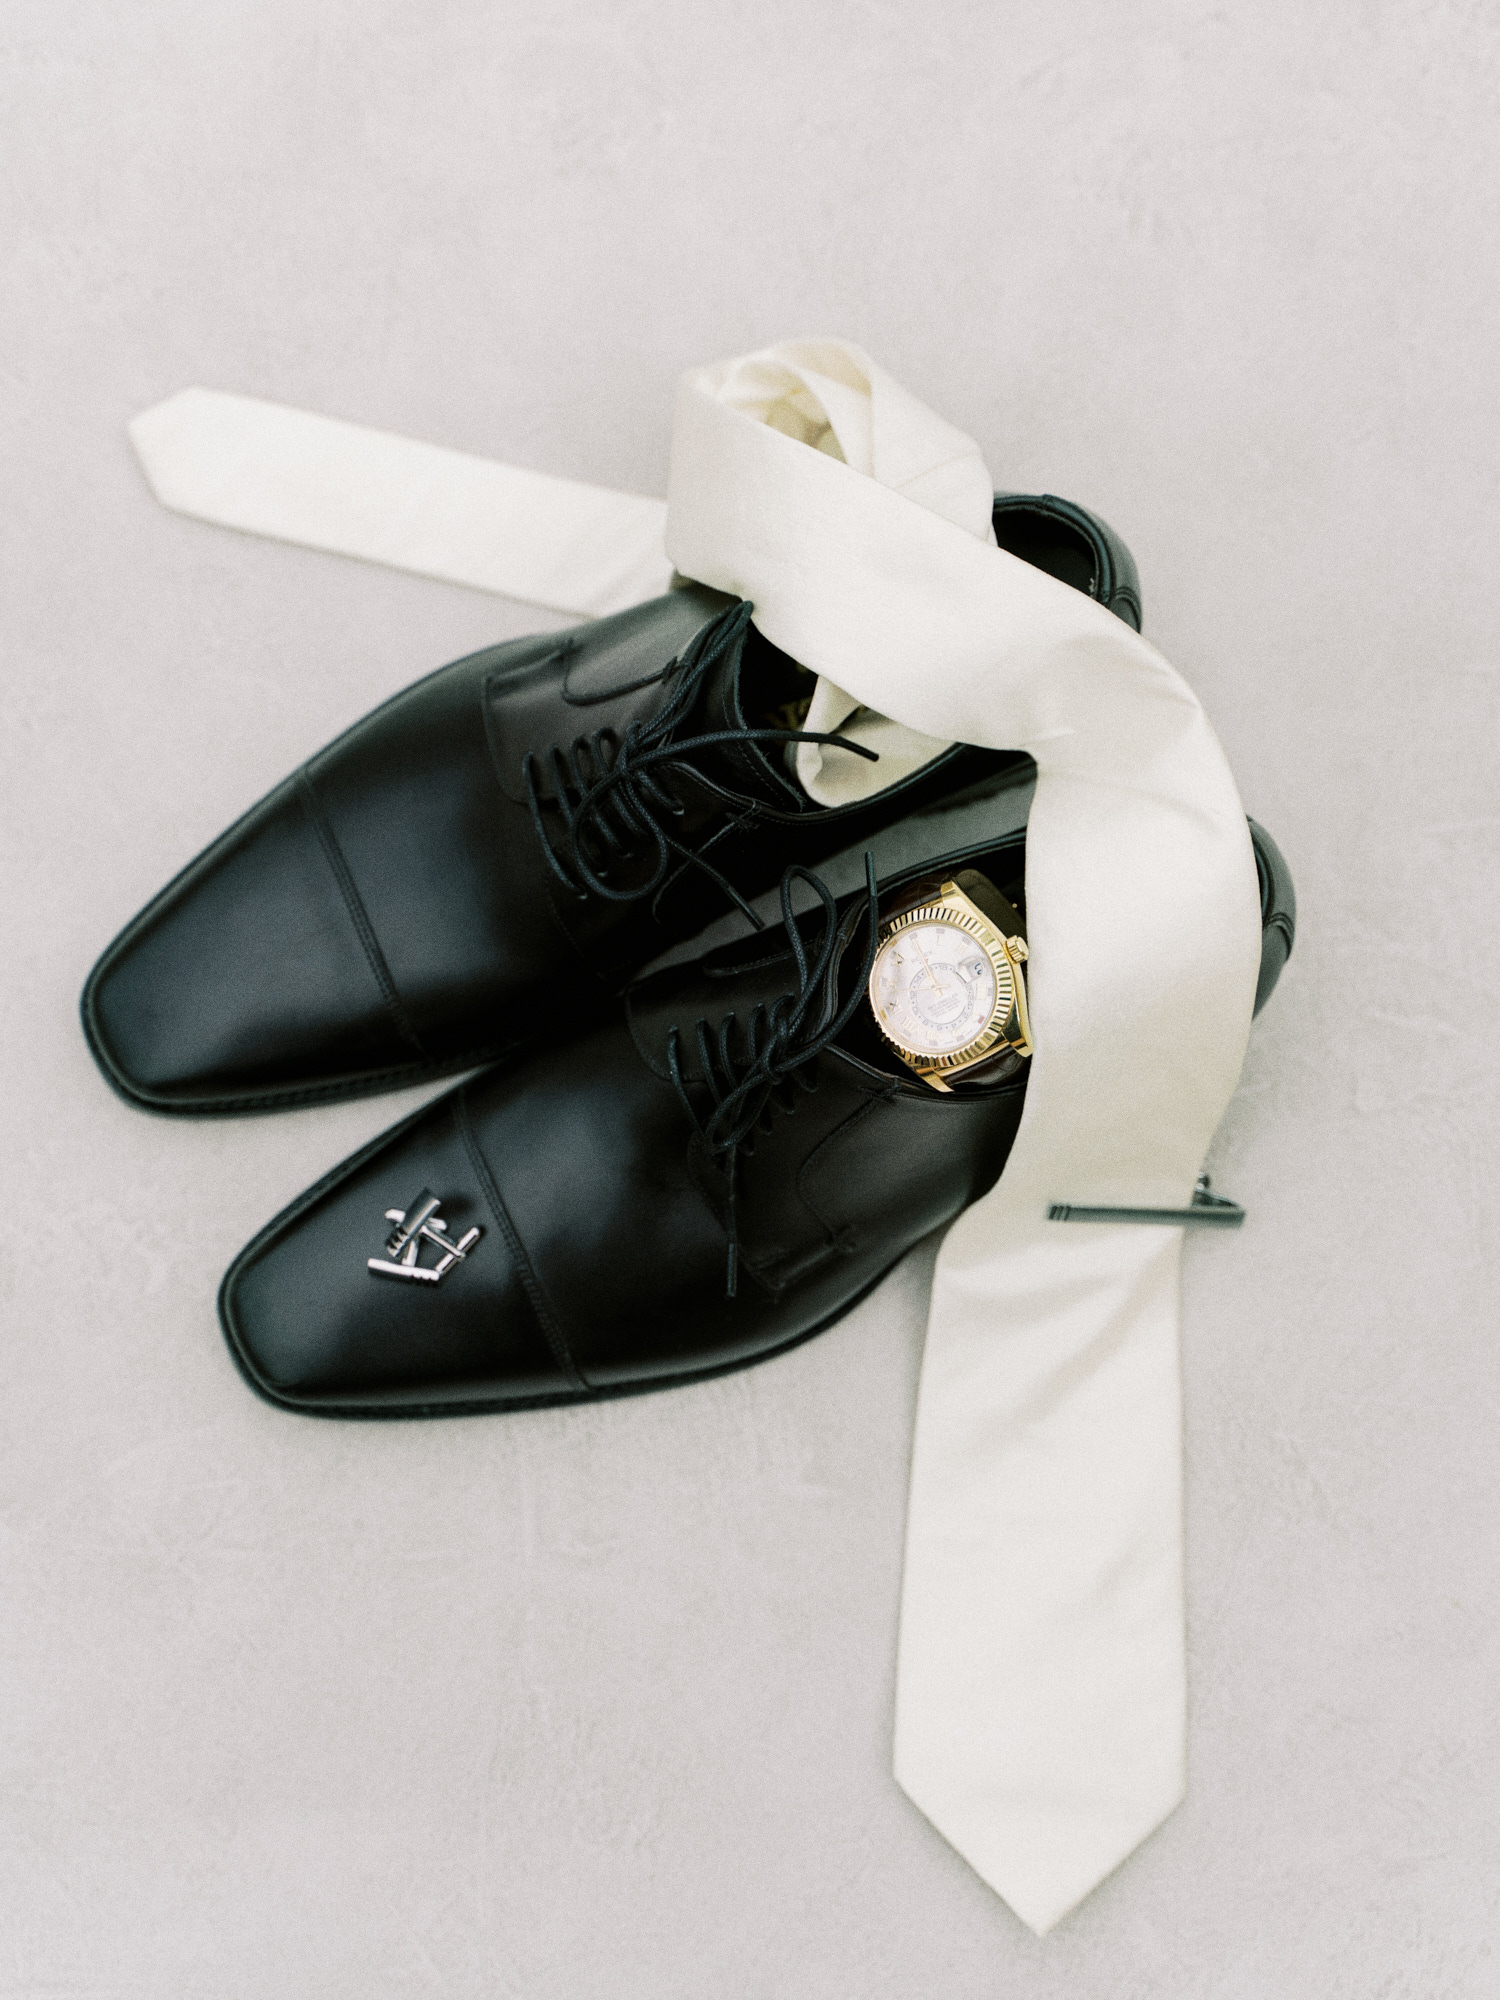 black groom's shoes with white tie, cufflinks and watch capture on a styling board